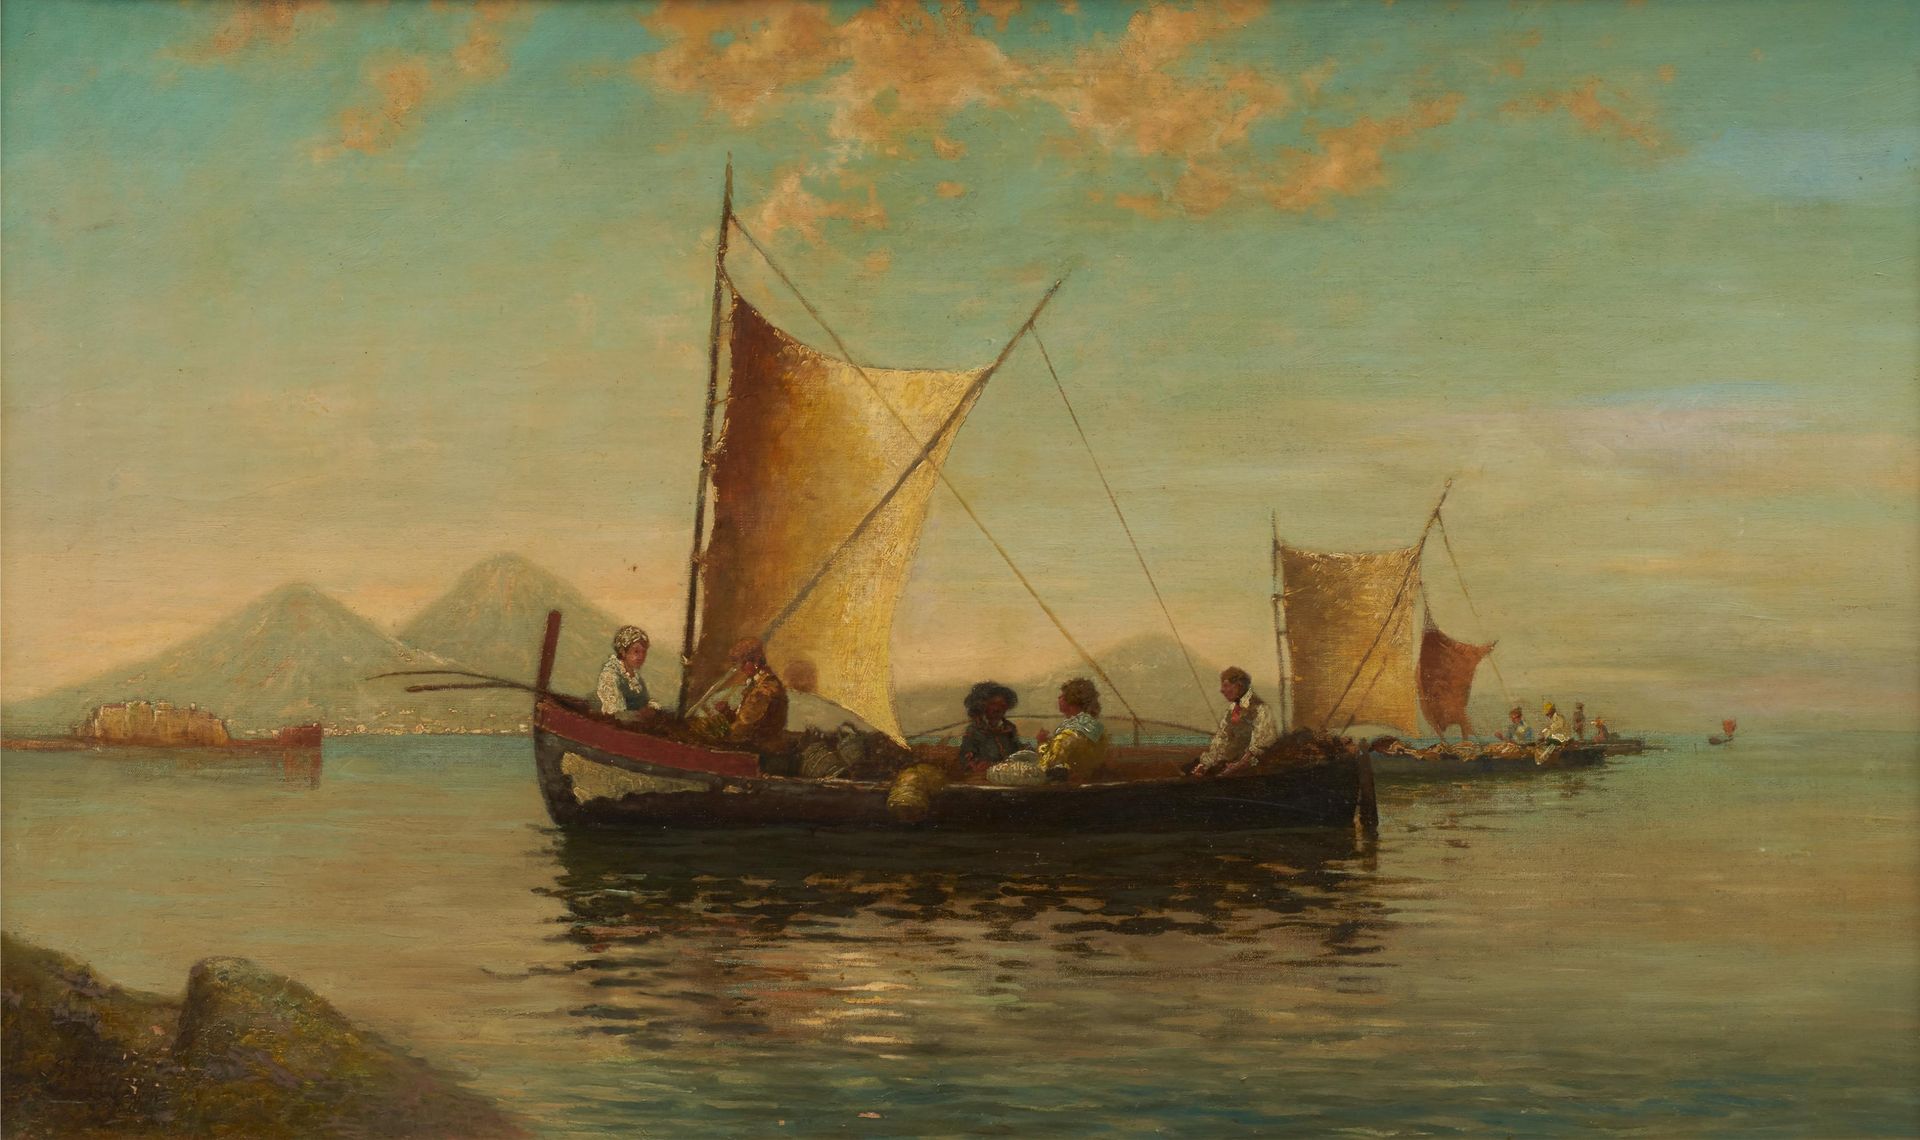 J. Bell BELL, J.
C. 1900
Title: Boats on the lake. 
Technique: oil on canvas. 
M&hellip;